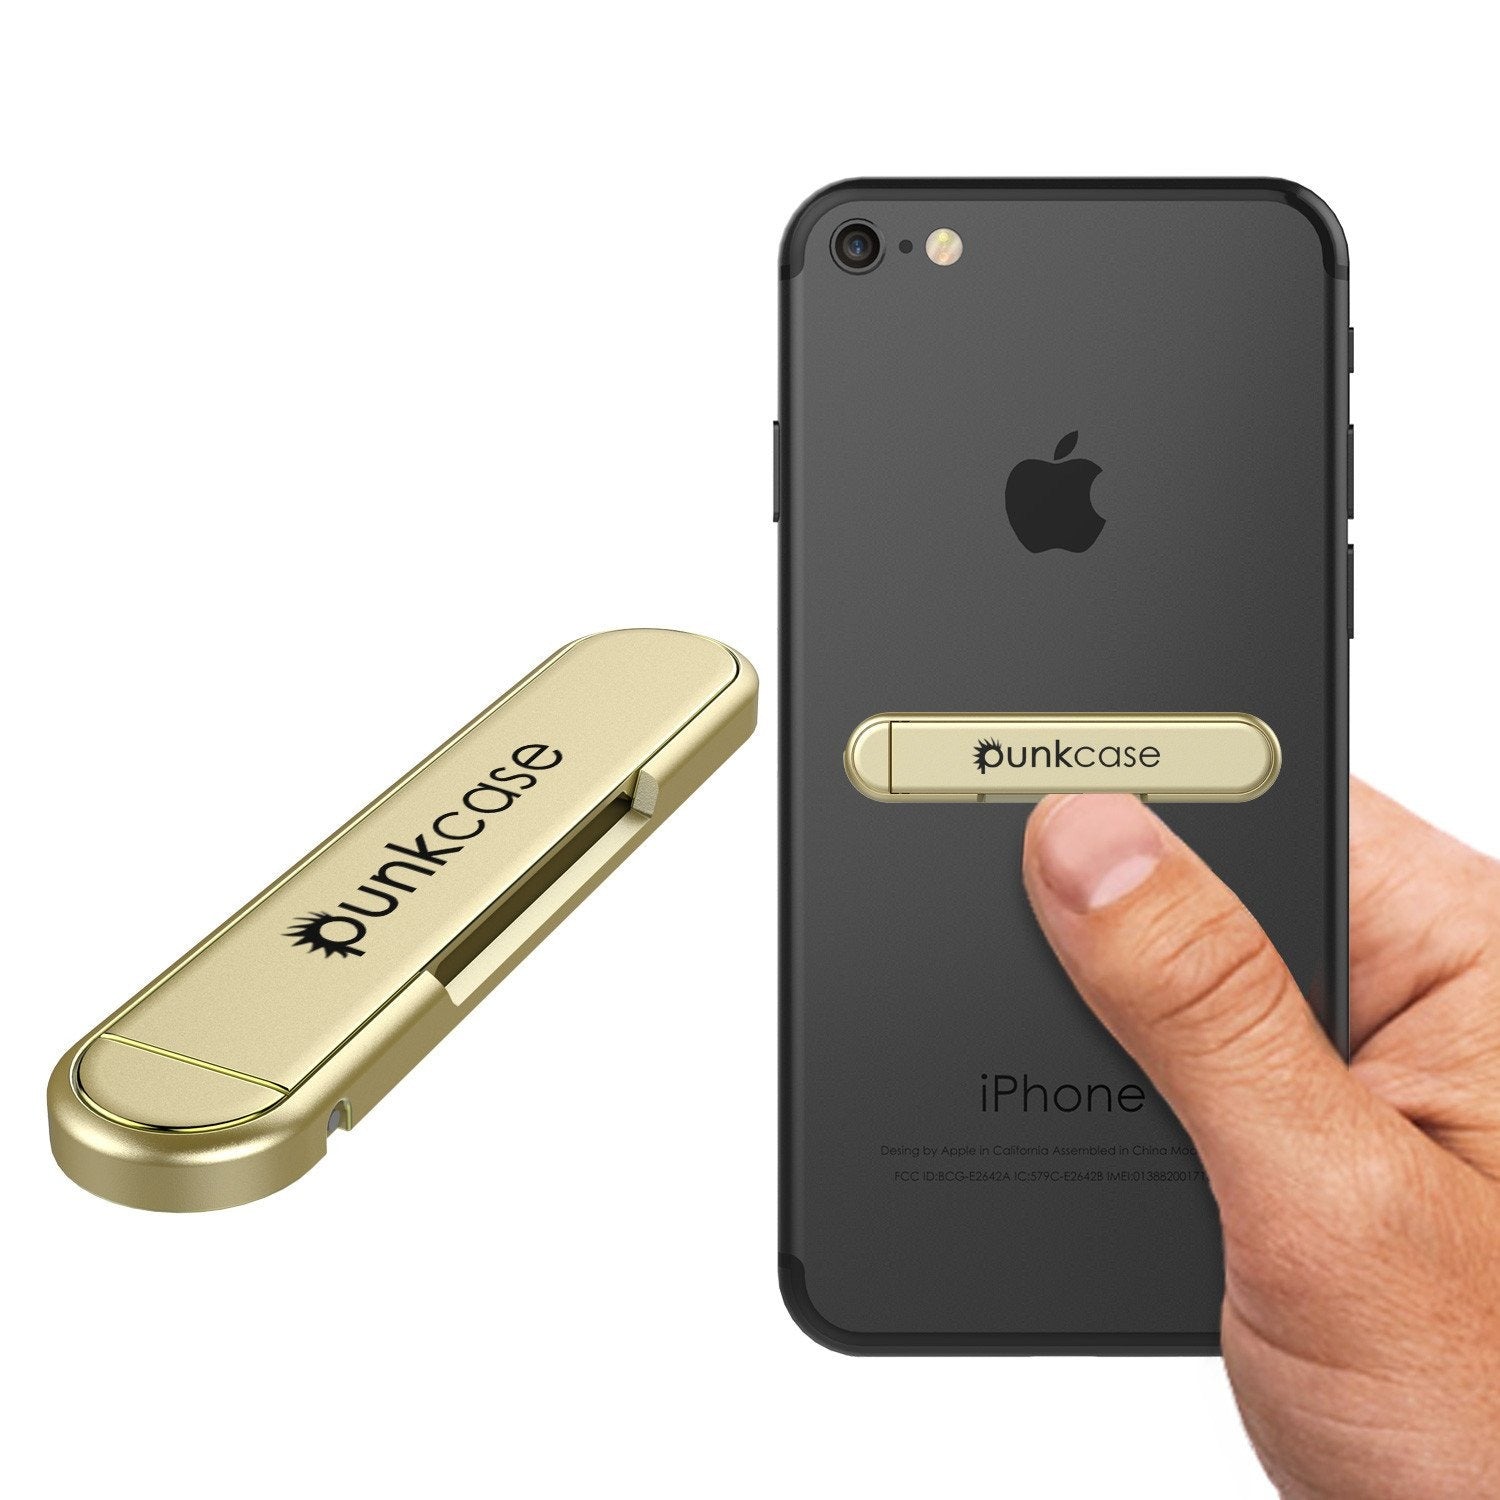 PUNKCASE FlickStick Universal Cell Phone Kickstand for all Mobile Phones & Cases with Flat Backs, One Finger Operation (Gold) (Color in image: Gold)